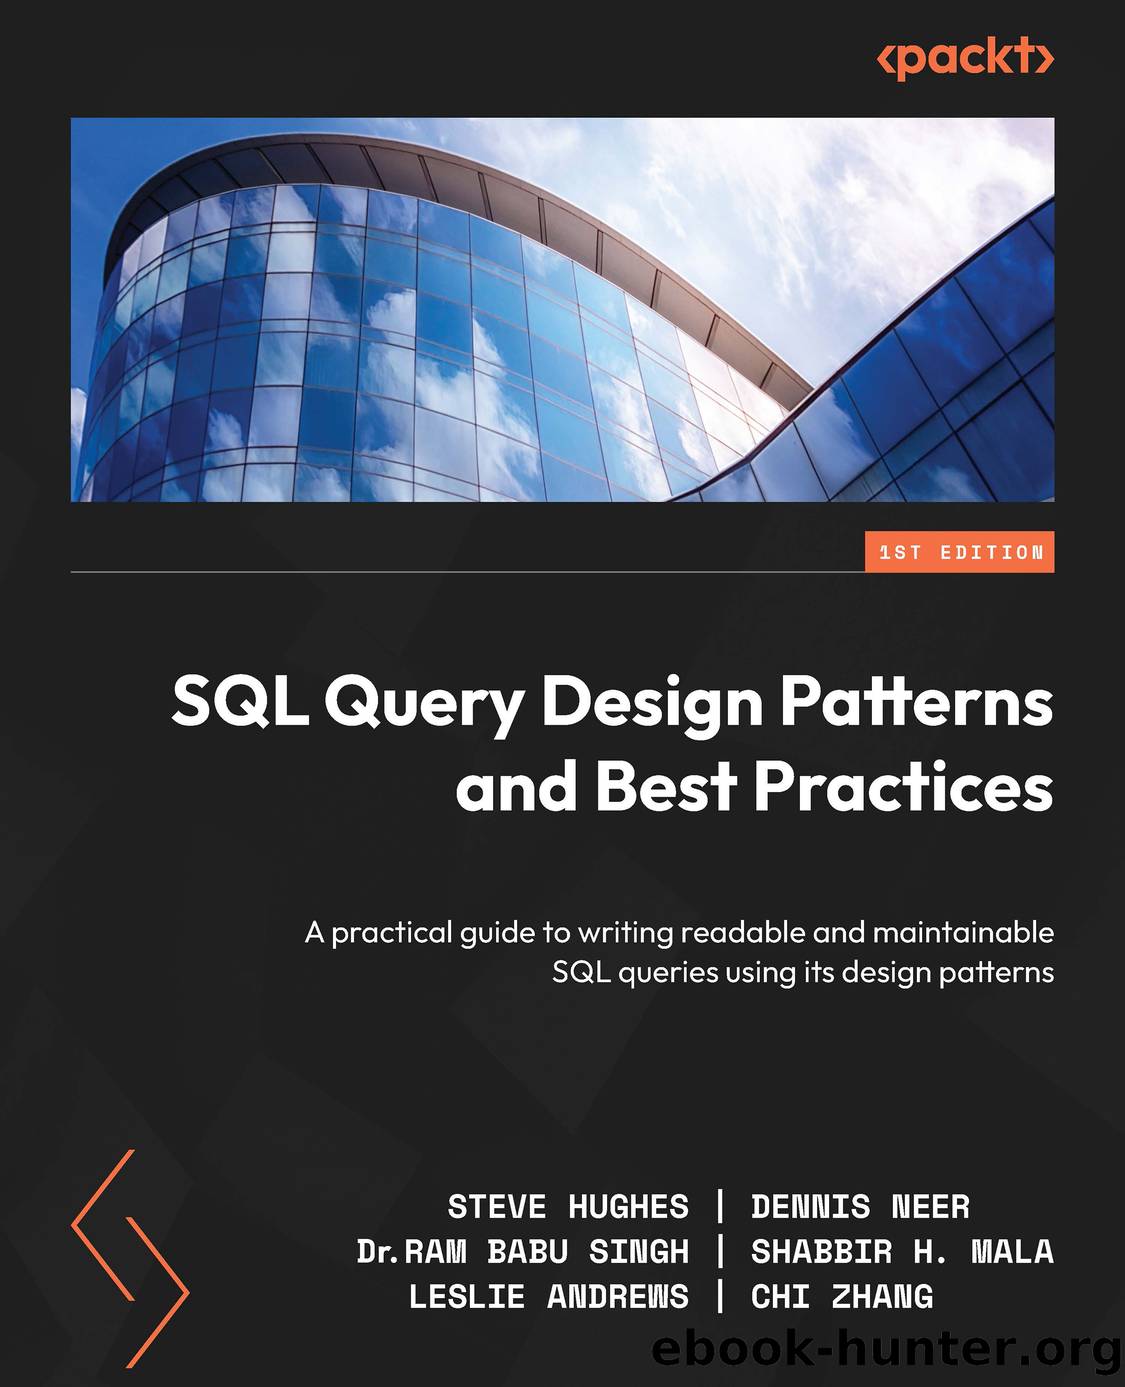 SQL Query Design Patterns and Best Practices by Steve Hughes & Dennis Neer & Dr. Ram Babu Singh & Shabbir H. Mala & Leslie Andrews & Chi Zhang